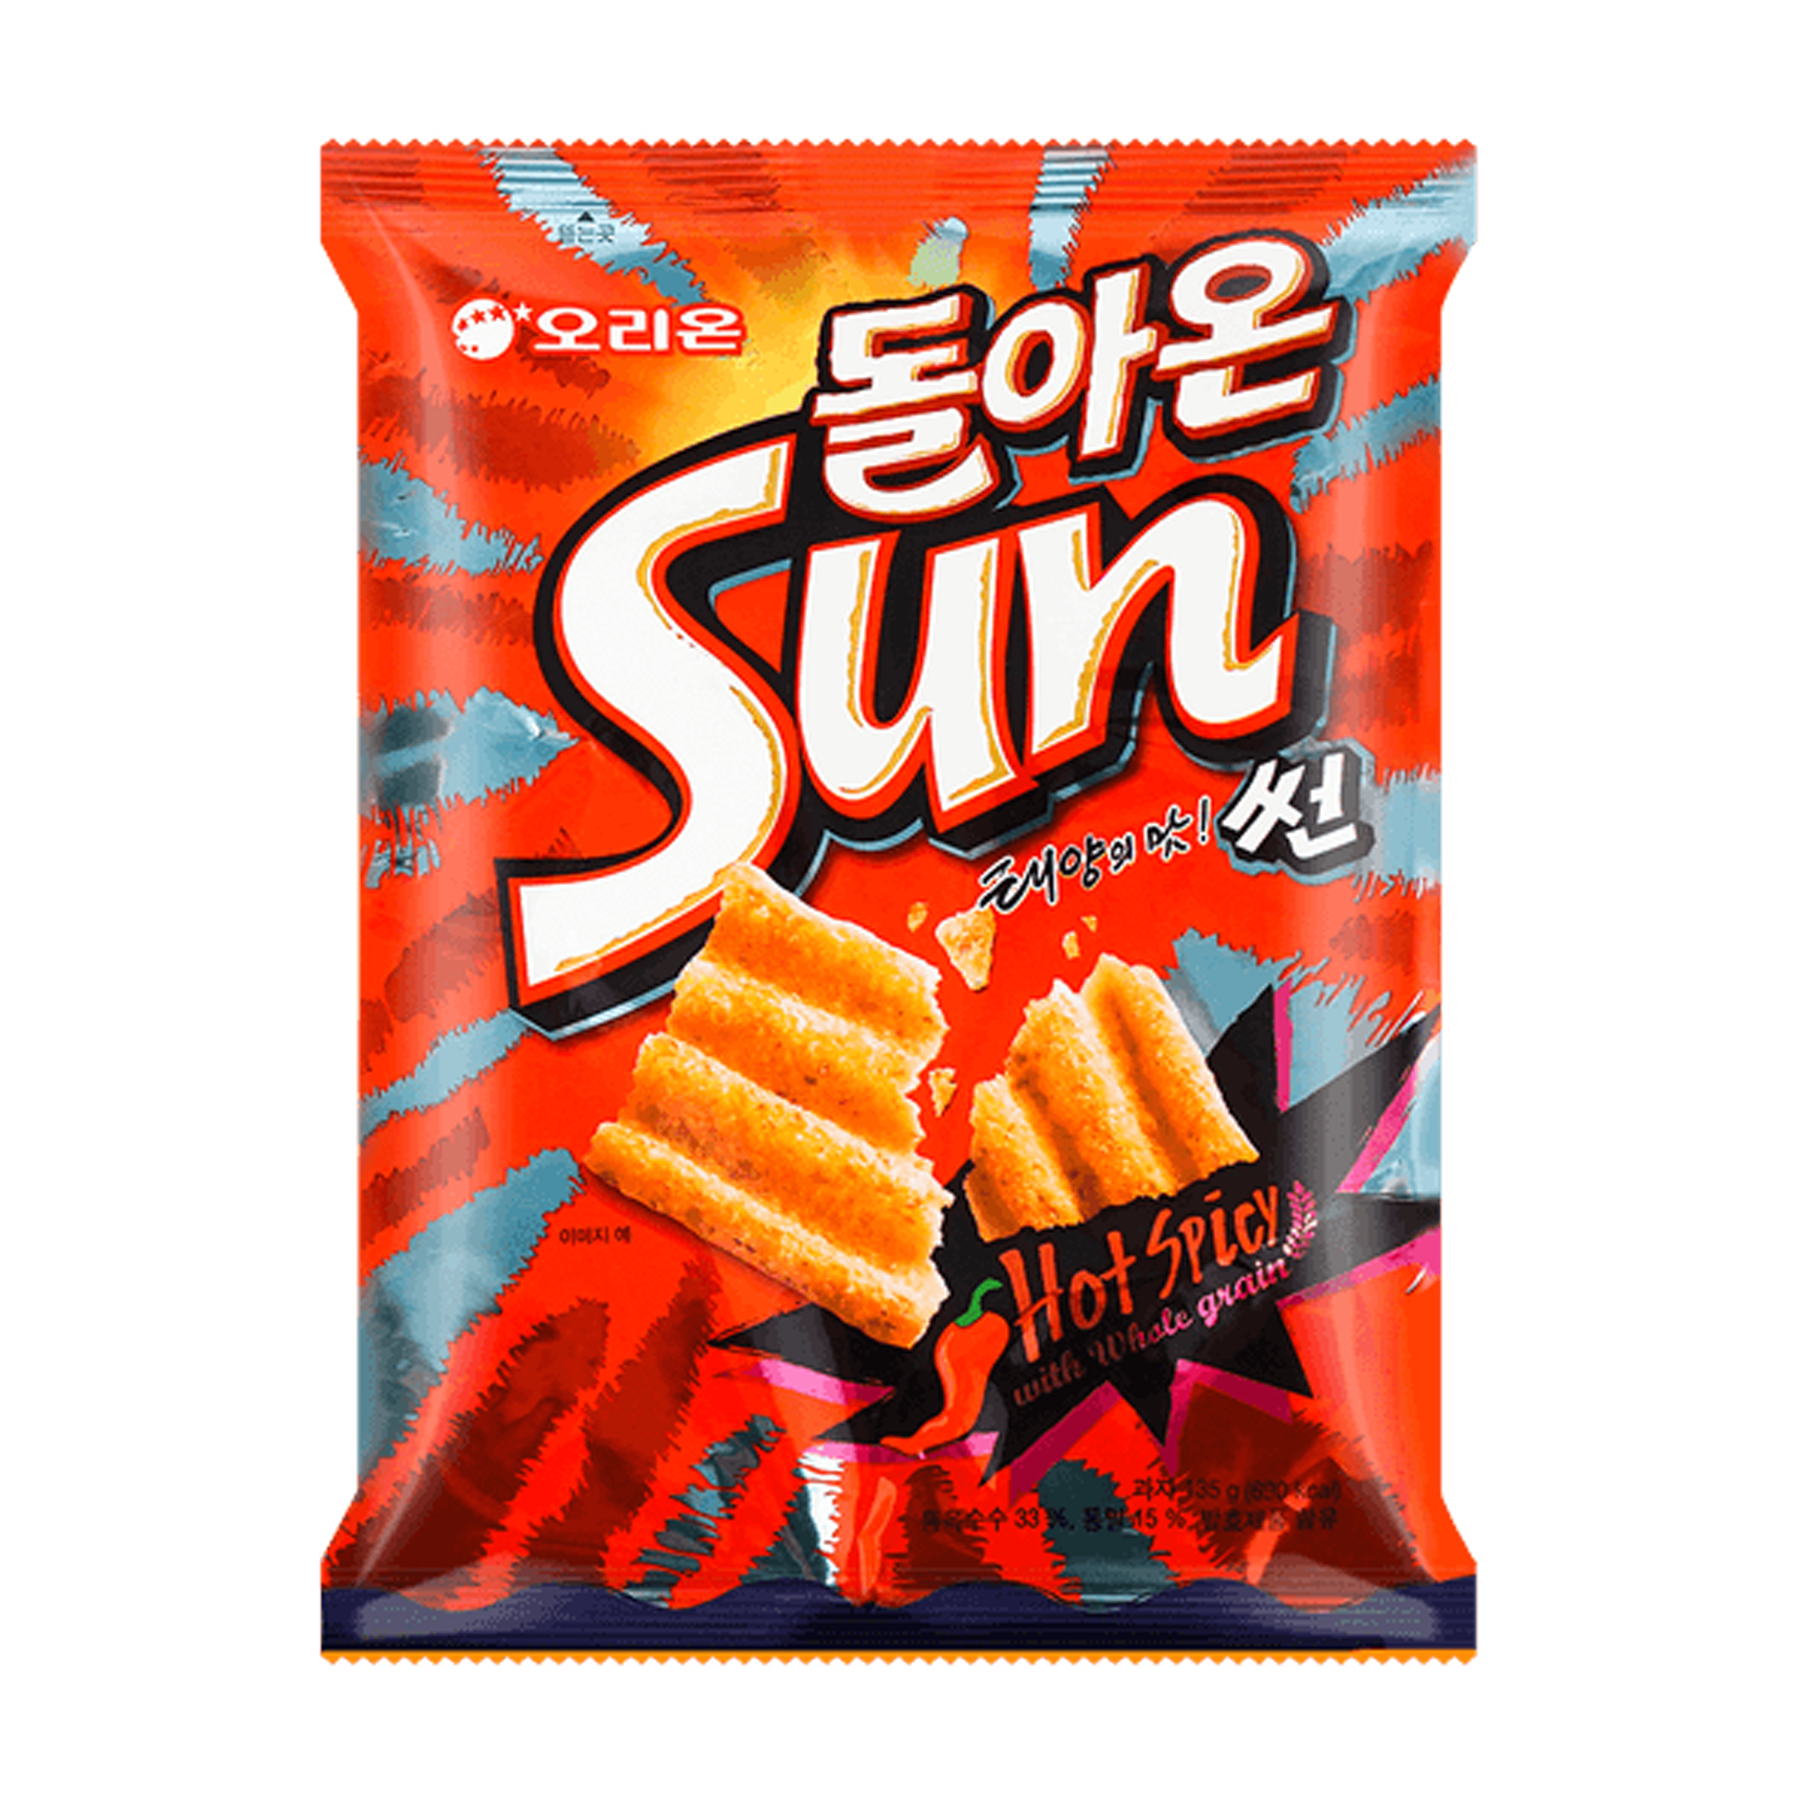 Sun Chips Hot Spicy Flavored